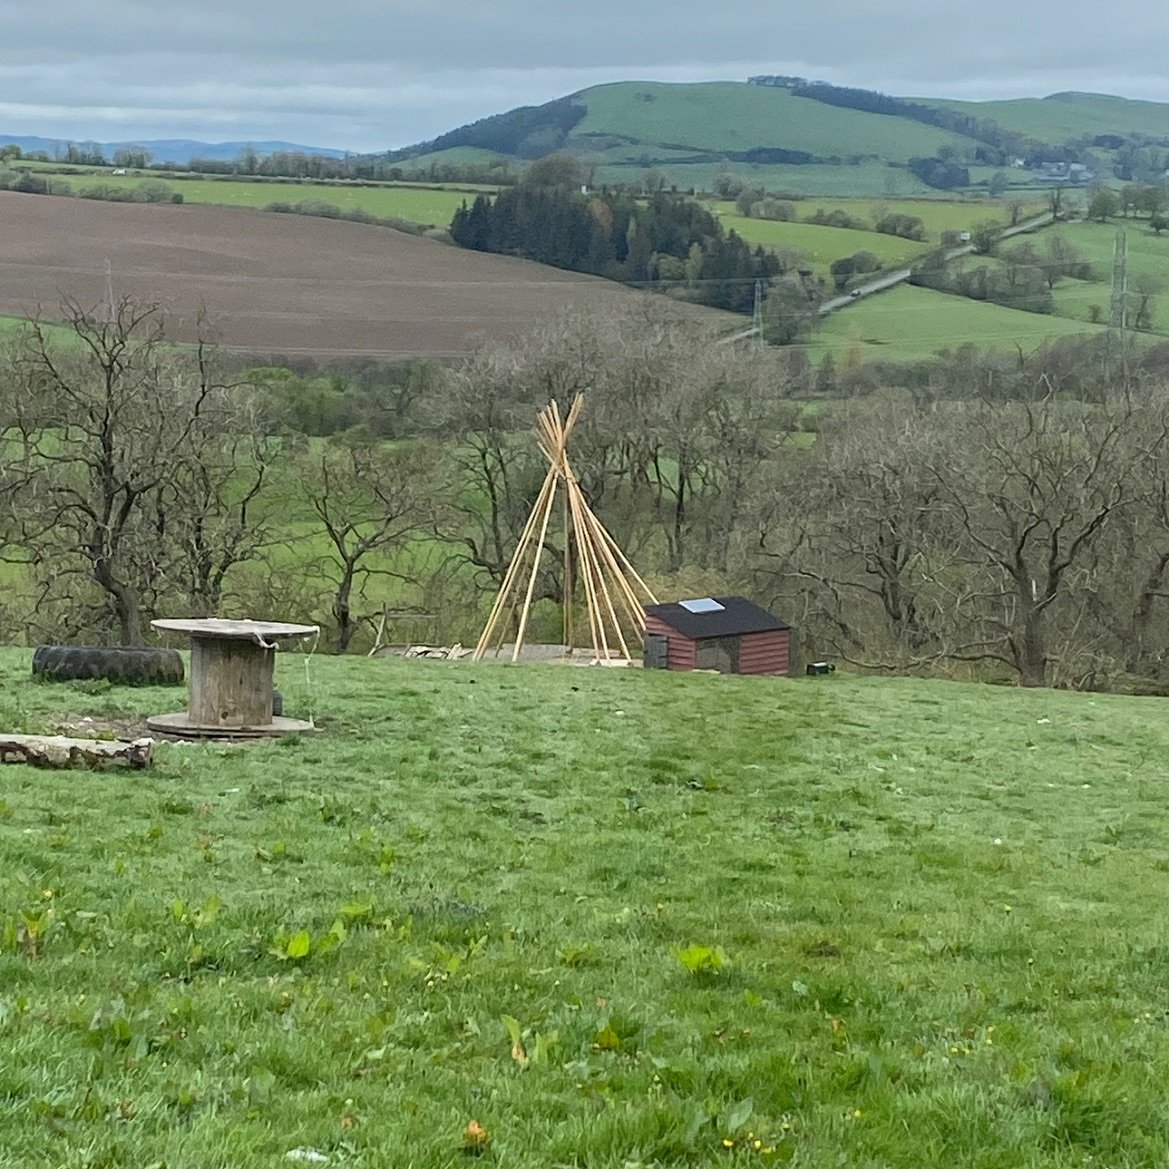 That&rsquo;s some view! Big tipi lodge going up while crossing fingers the weather stays calm for the canvas raising 🤞🏼💫

#healingspace #tipilodge #gatheringspace #tipi #mytipi #handmadeintheuk #familybusiness